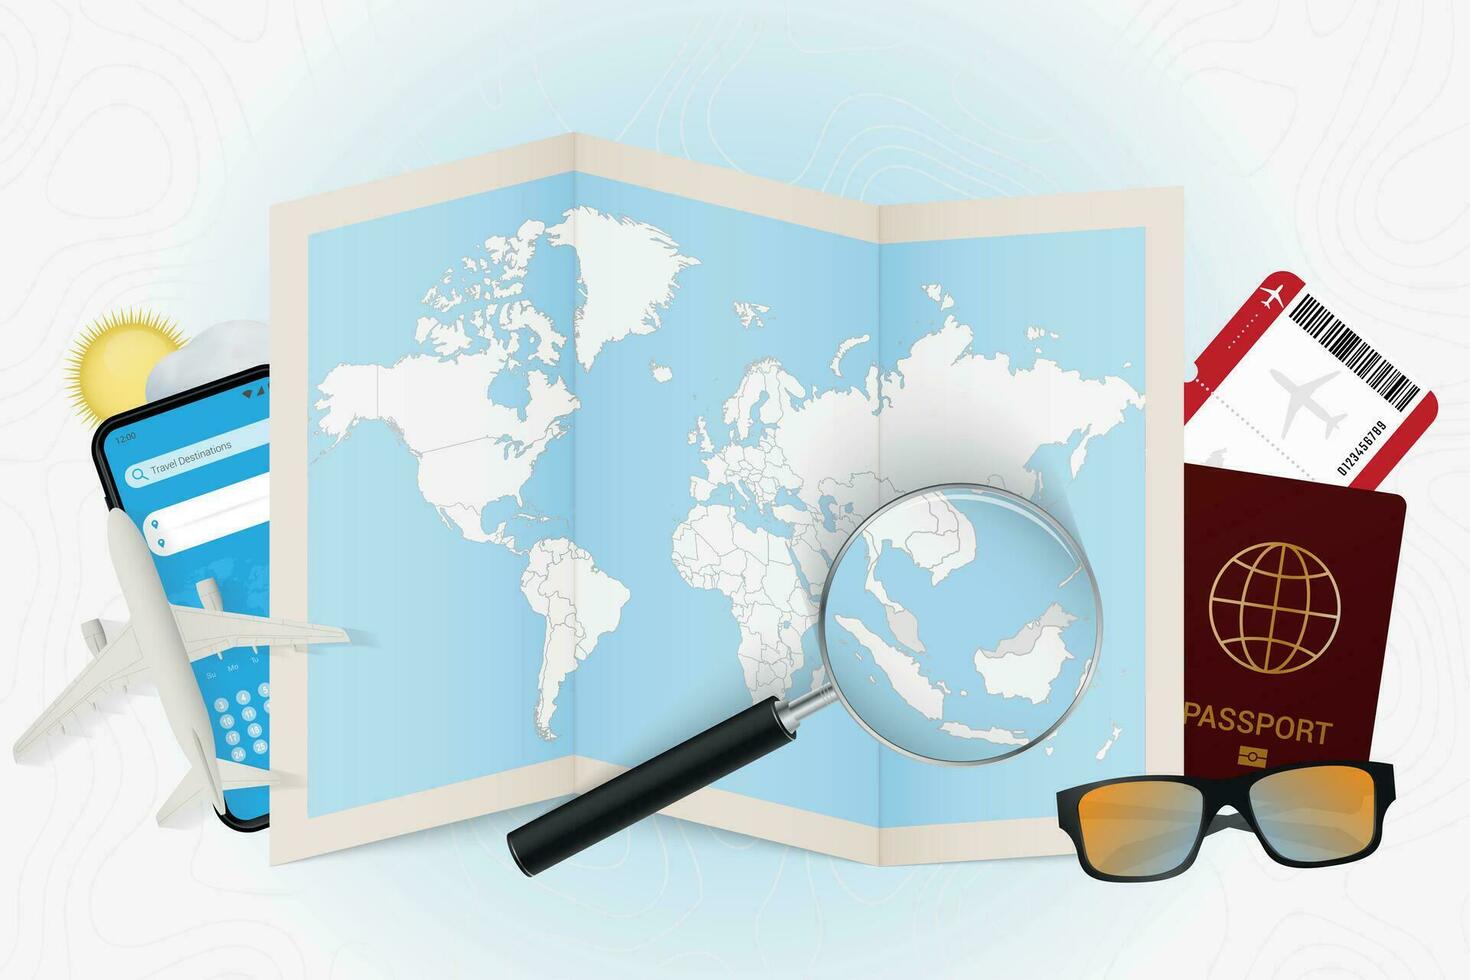 Travel destination Malaysia, tourism mockup with travel equipment and world map with magnifying glass on a Malaysia. vector